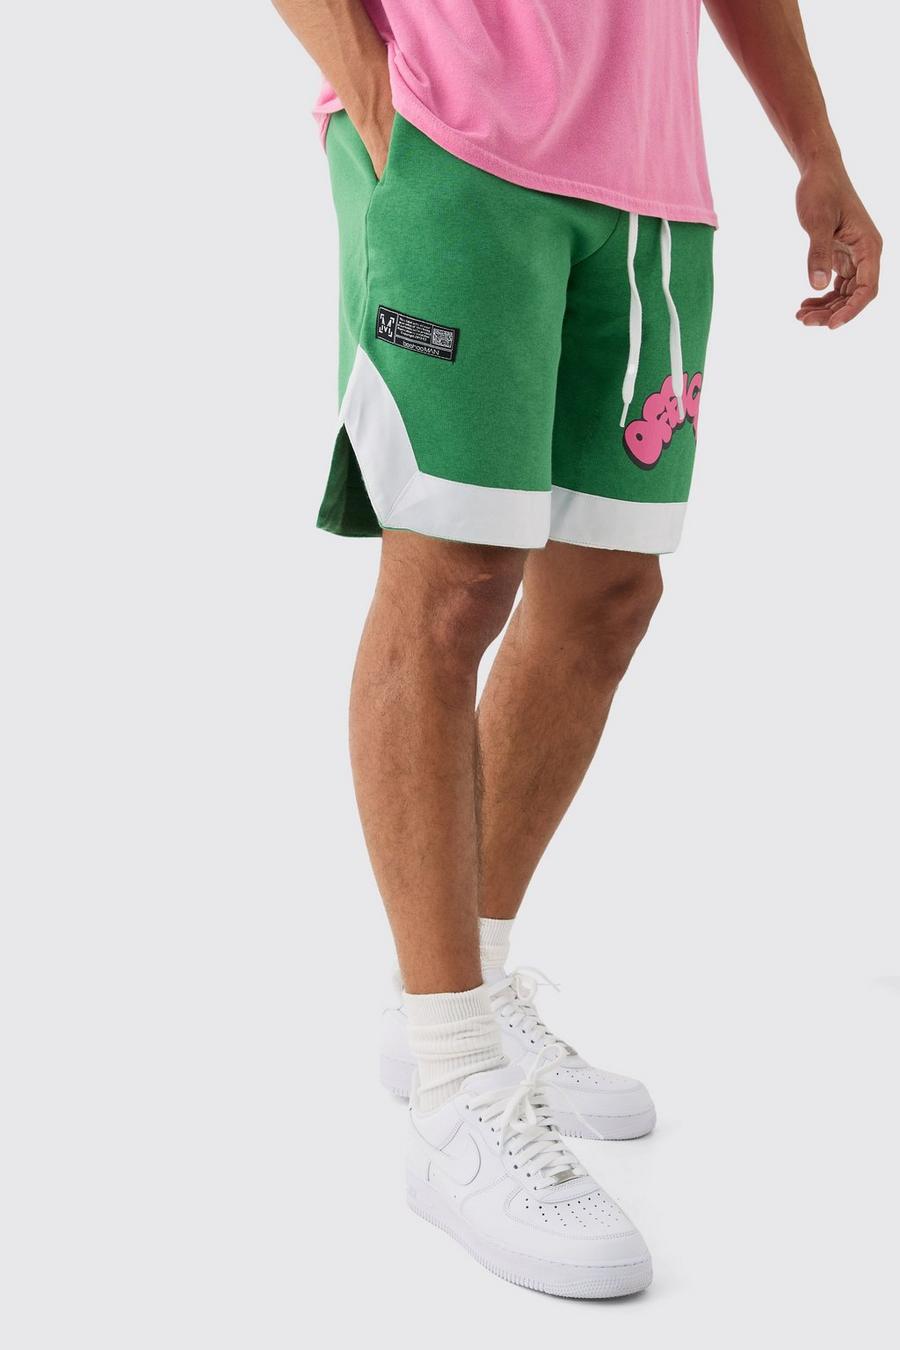 Forest Official Basketball Shorts image number 1